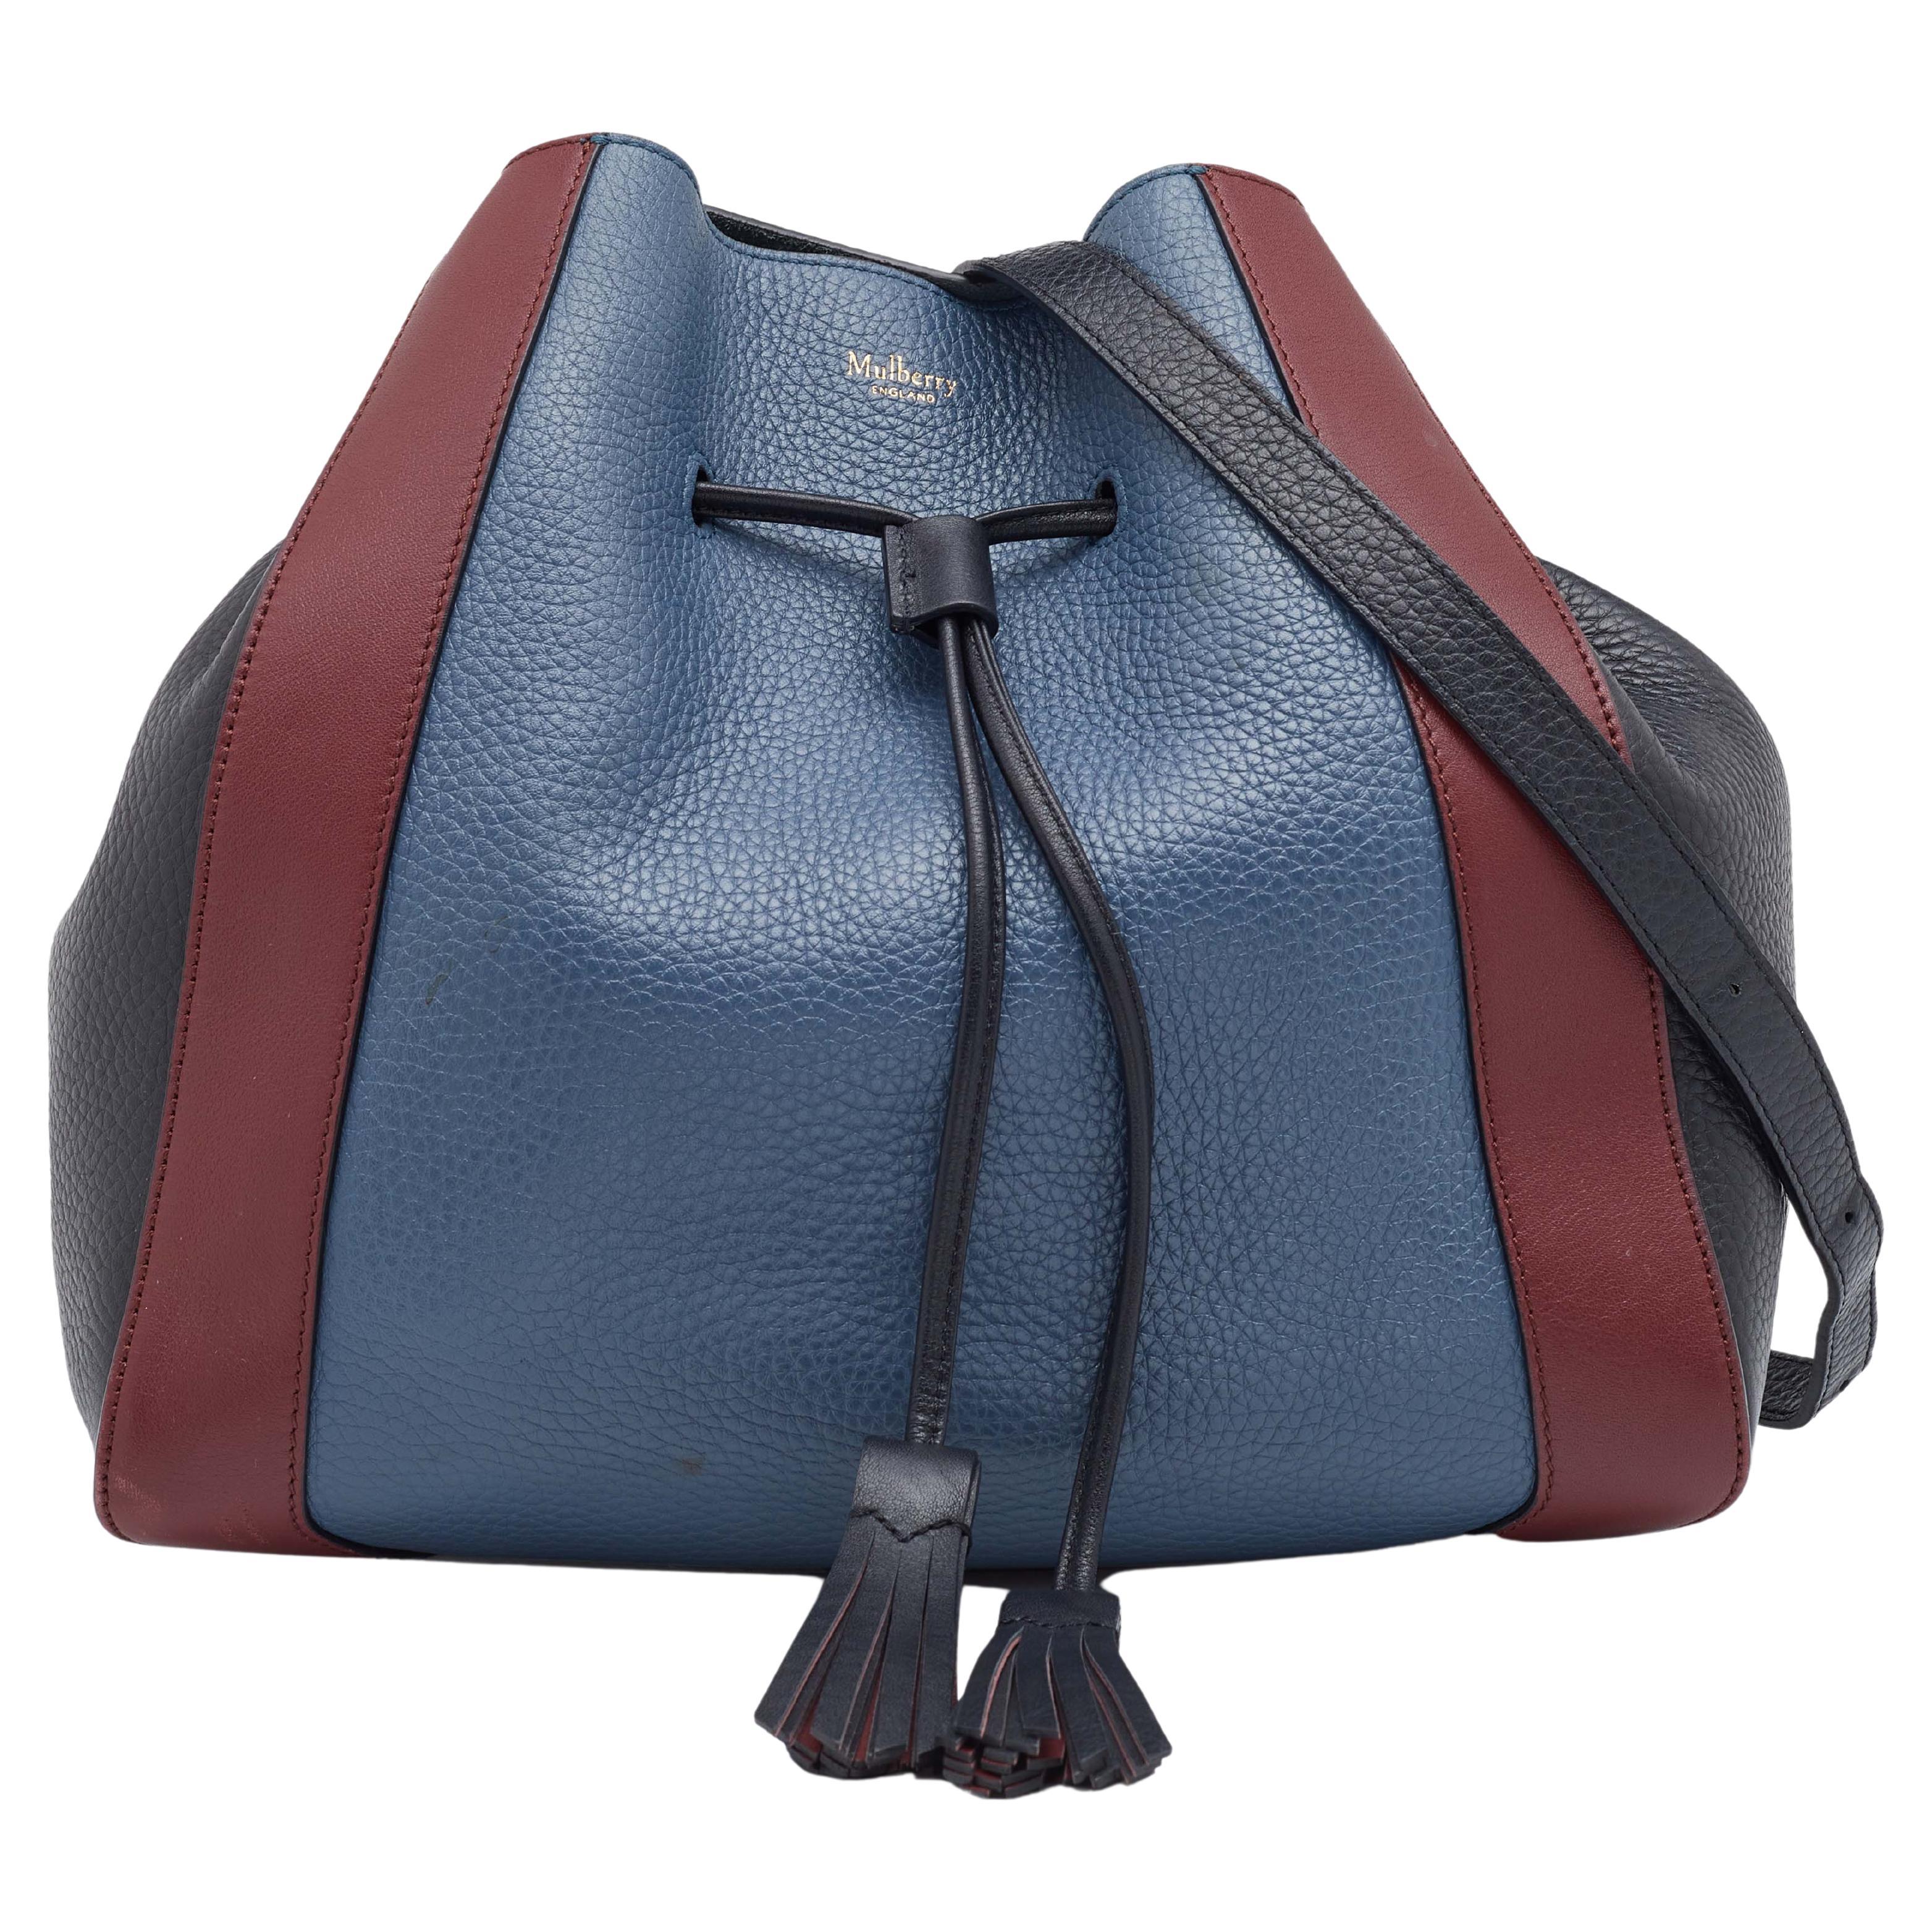 Mulberry Multicolour Leather Millie Drawstring Tote